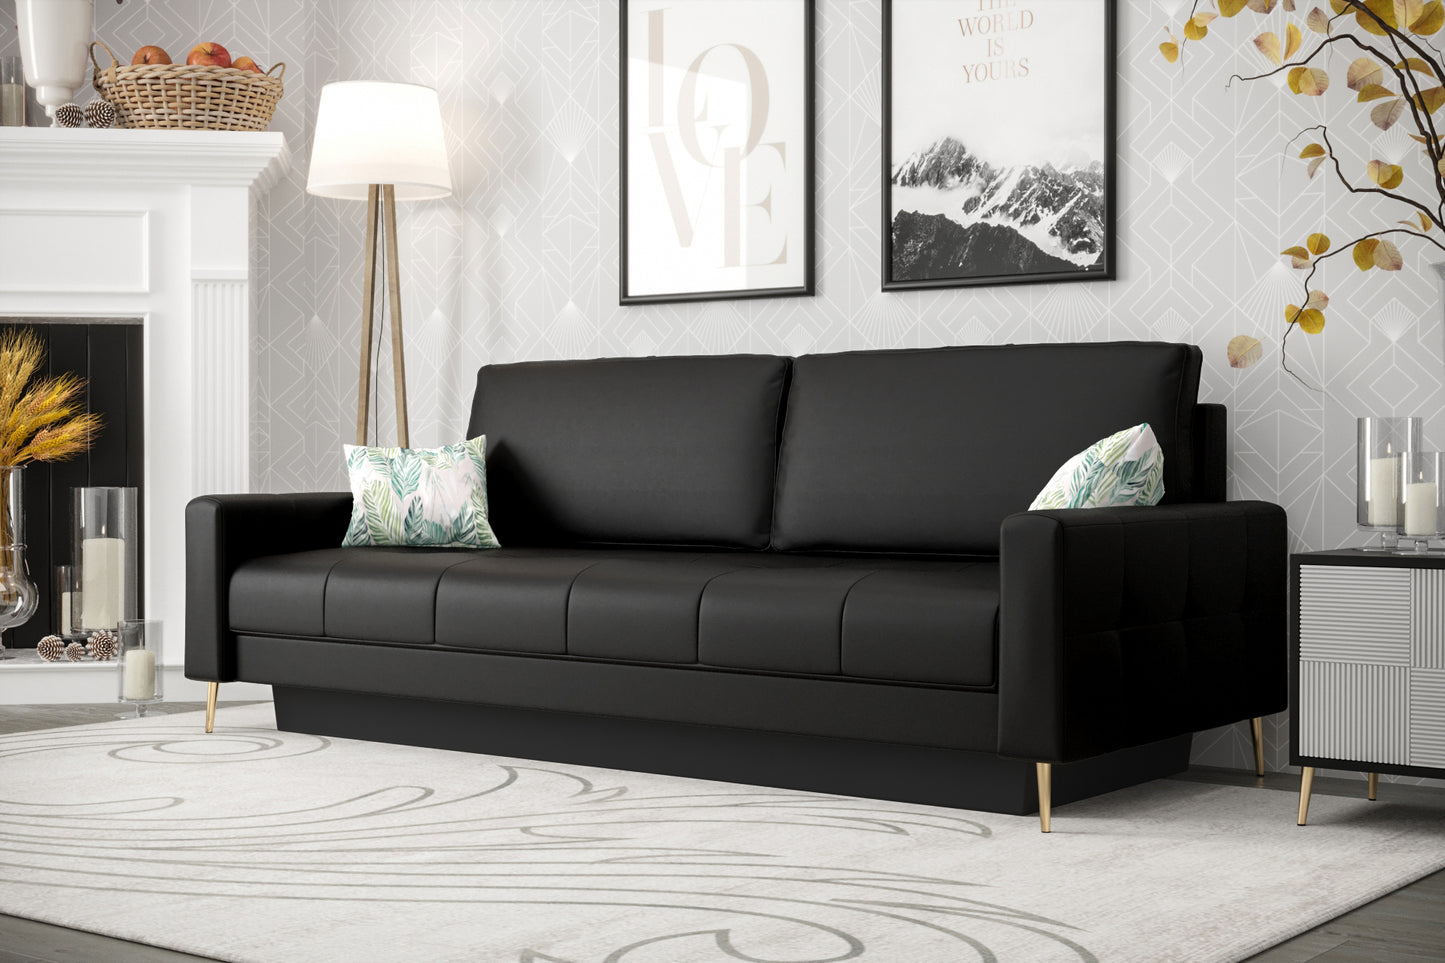 PIANO DL - 2 Seater Sofa with Sleeping Function, Various Colours, Modern Looking >225cm<